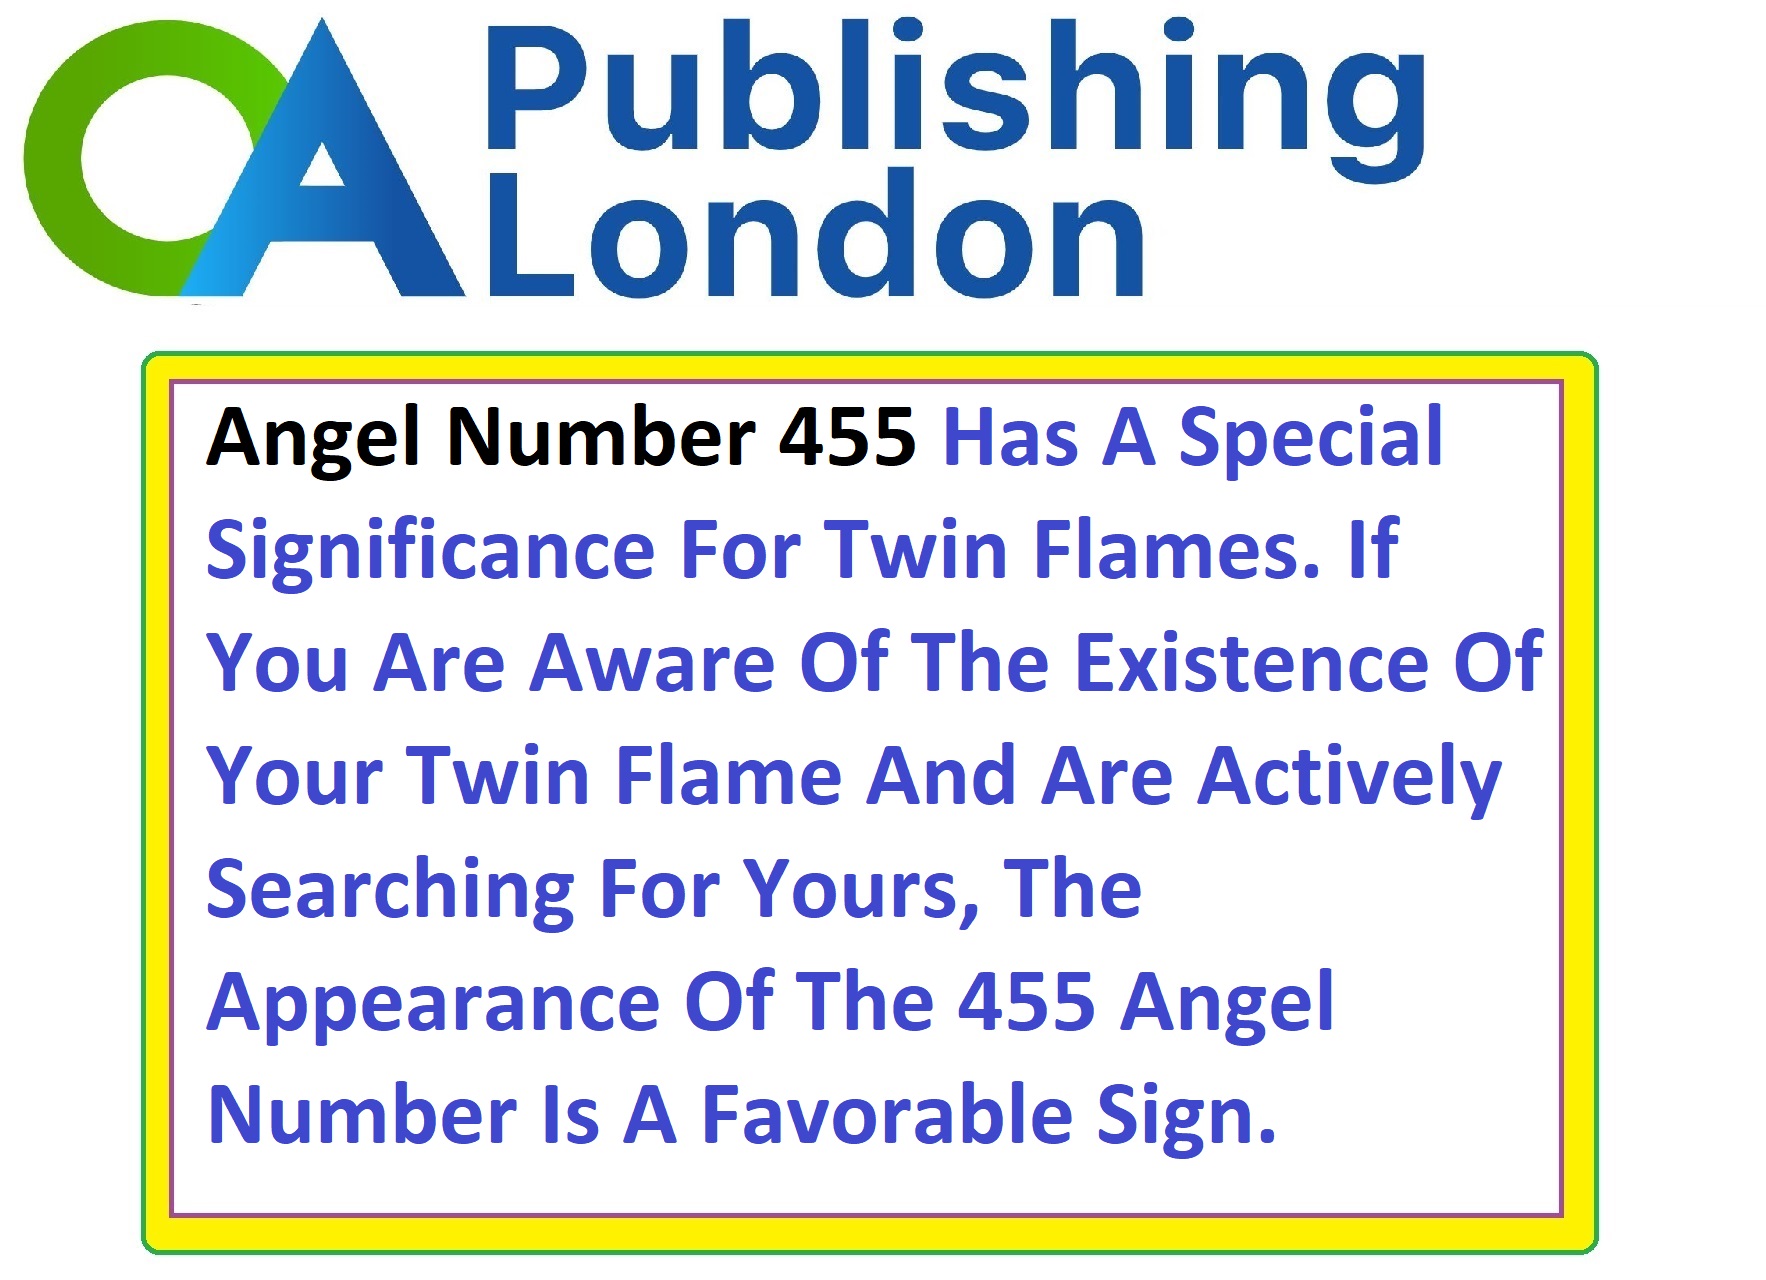 Definition of Angel Number 455 In terms of its twin flame